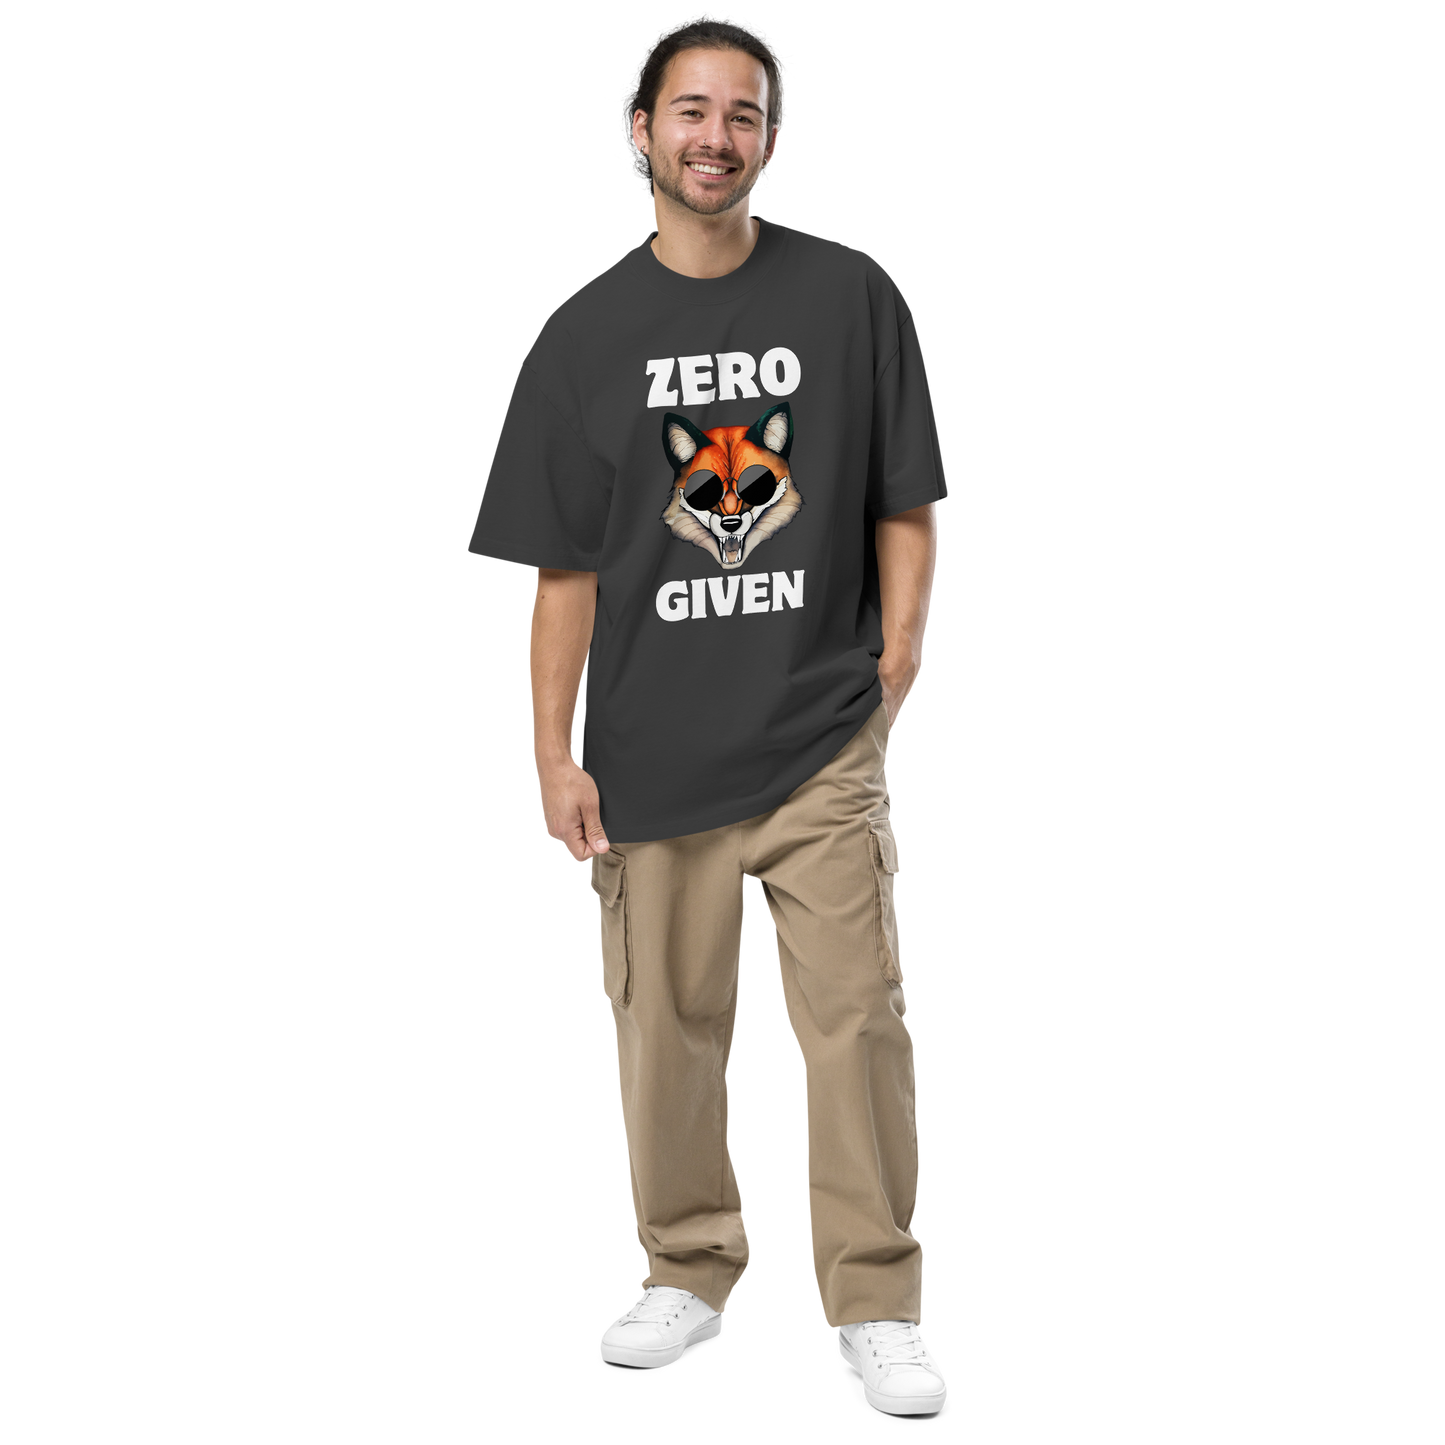 Man wearing a Faded Black Fox Oversized T-Shirt featuring a Zero Fox Given graphic on the chest - Funny Graphic Fox Oversized Tees - Boozy Fox